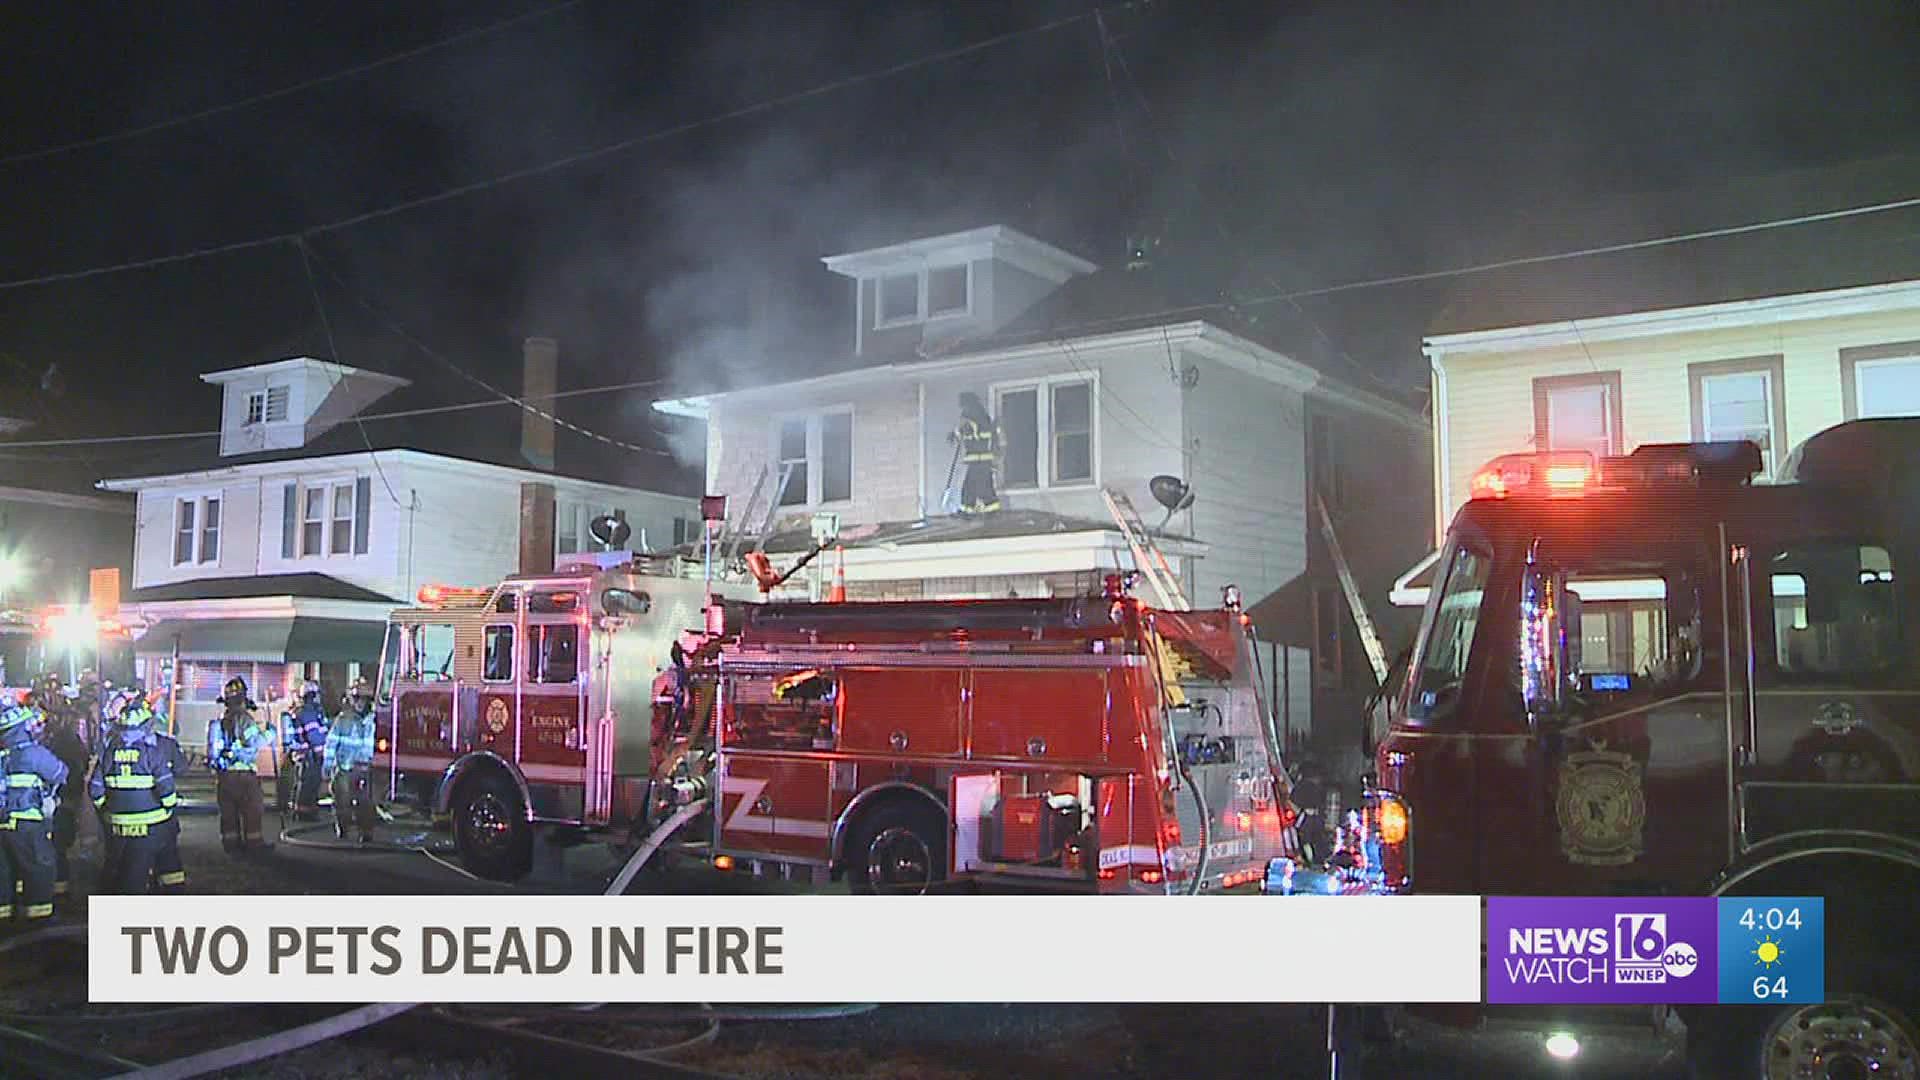 The Tremont fire also took the lives of two dogs.